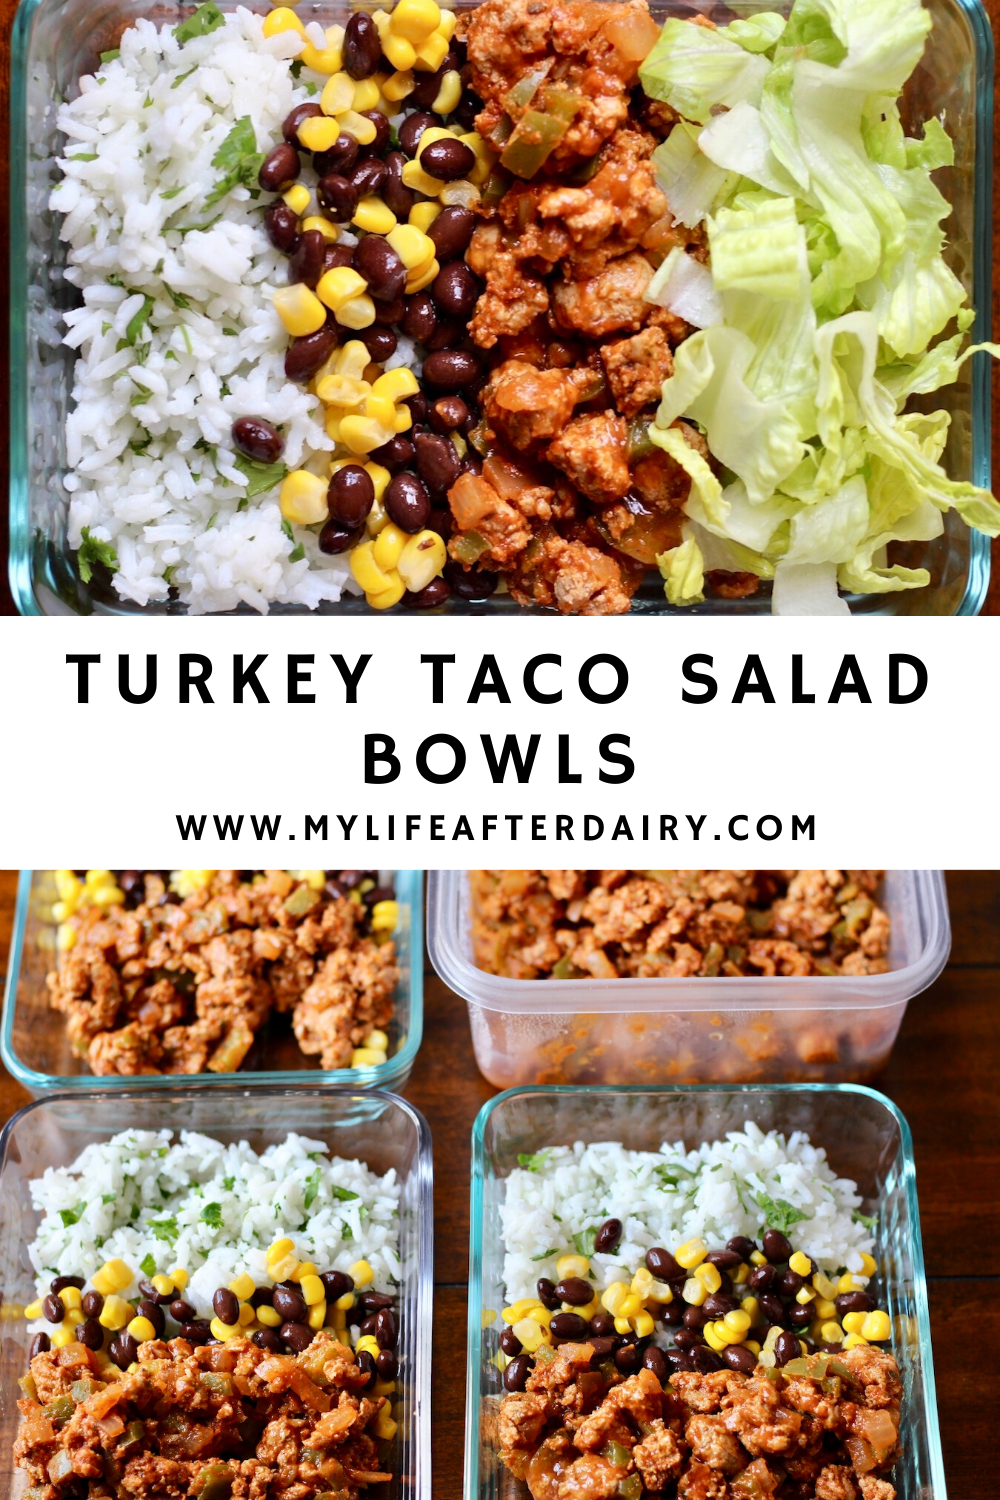 Turkey Taco Salad Bowls -   18 meal prep recipes healthy work lunches ideas